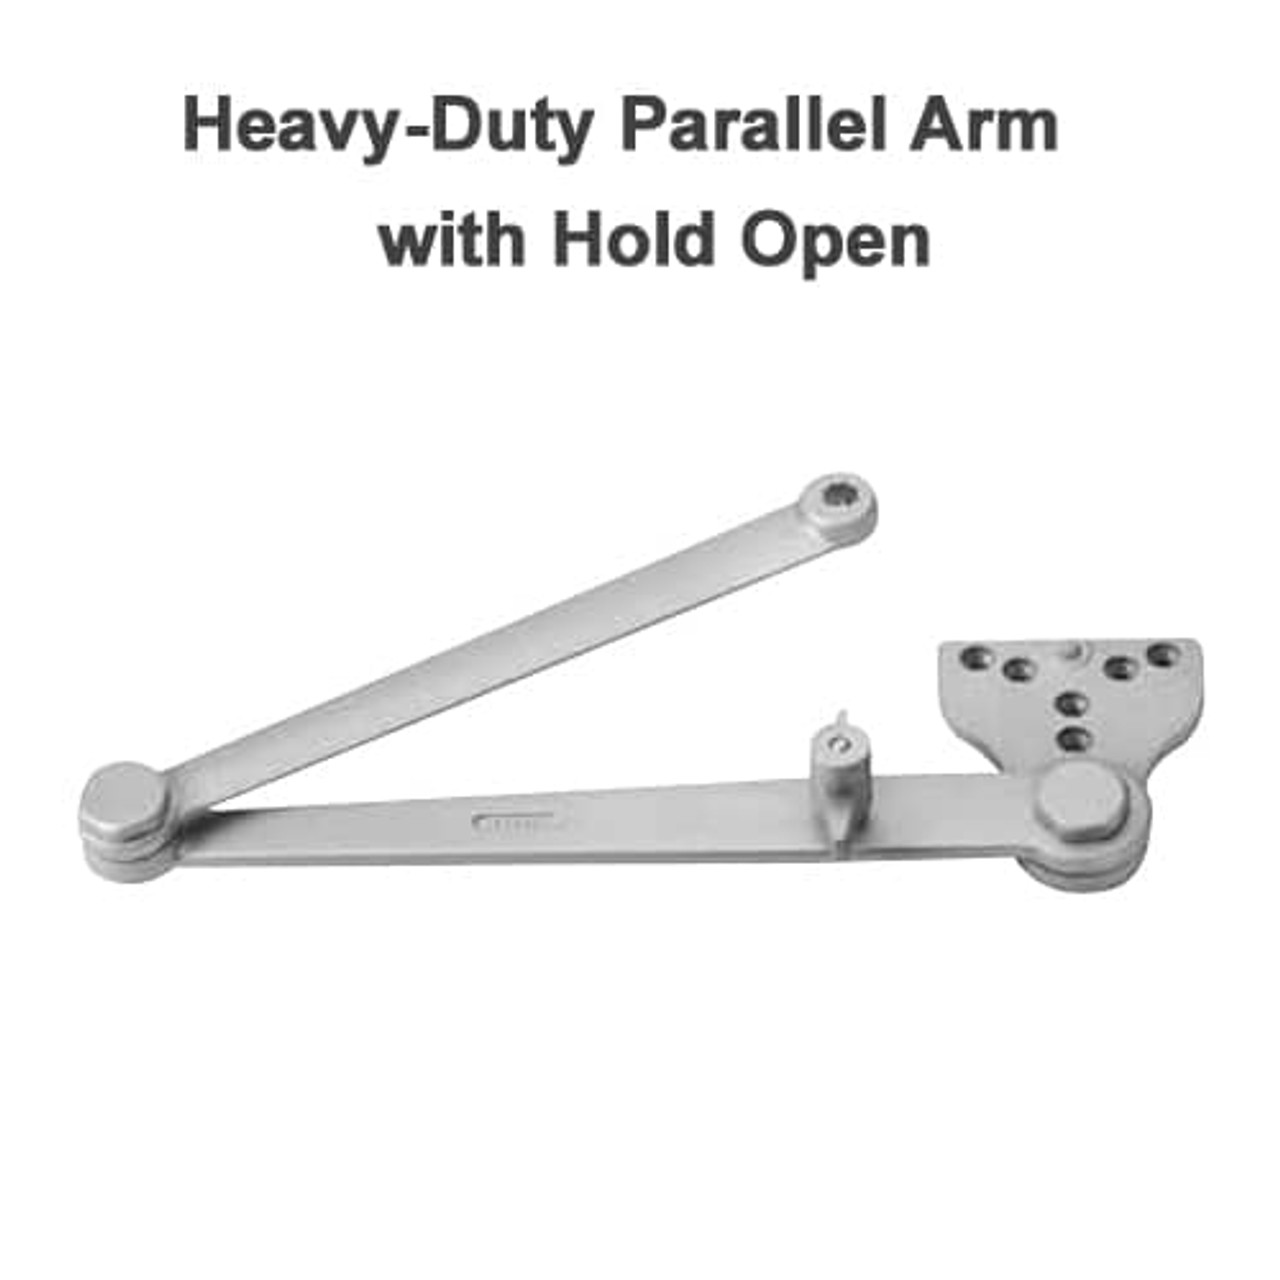 DC6210-A2-690-M54 Corbin 6000 Series Multi-Sized Heavy-Duty Parallel Arm Door Closers with Hold Open Arm in Dark Bronze